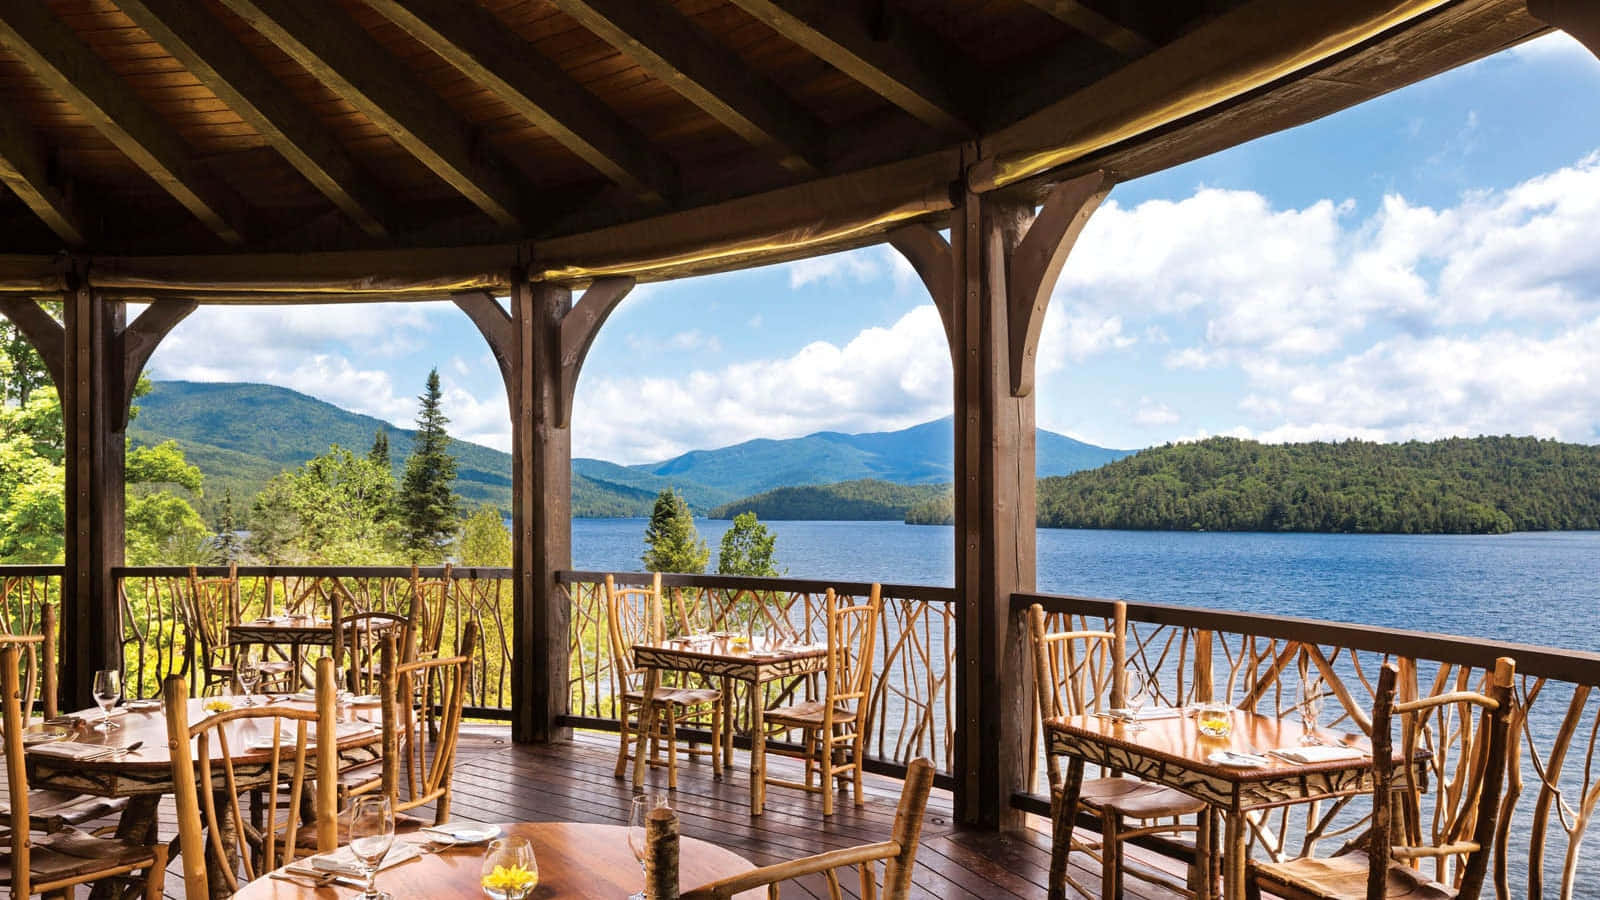 Relaxing Scenery At The Lake Placid Lodge Wallpaper